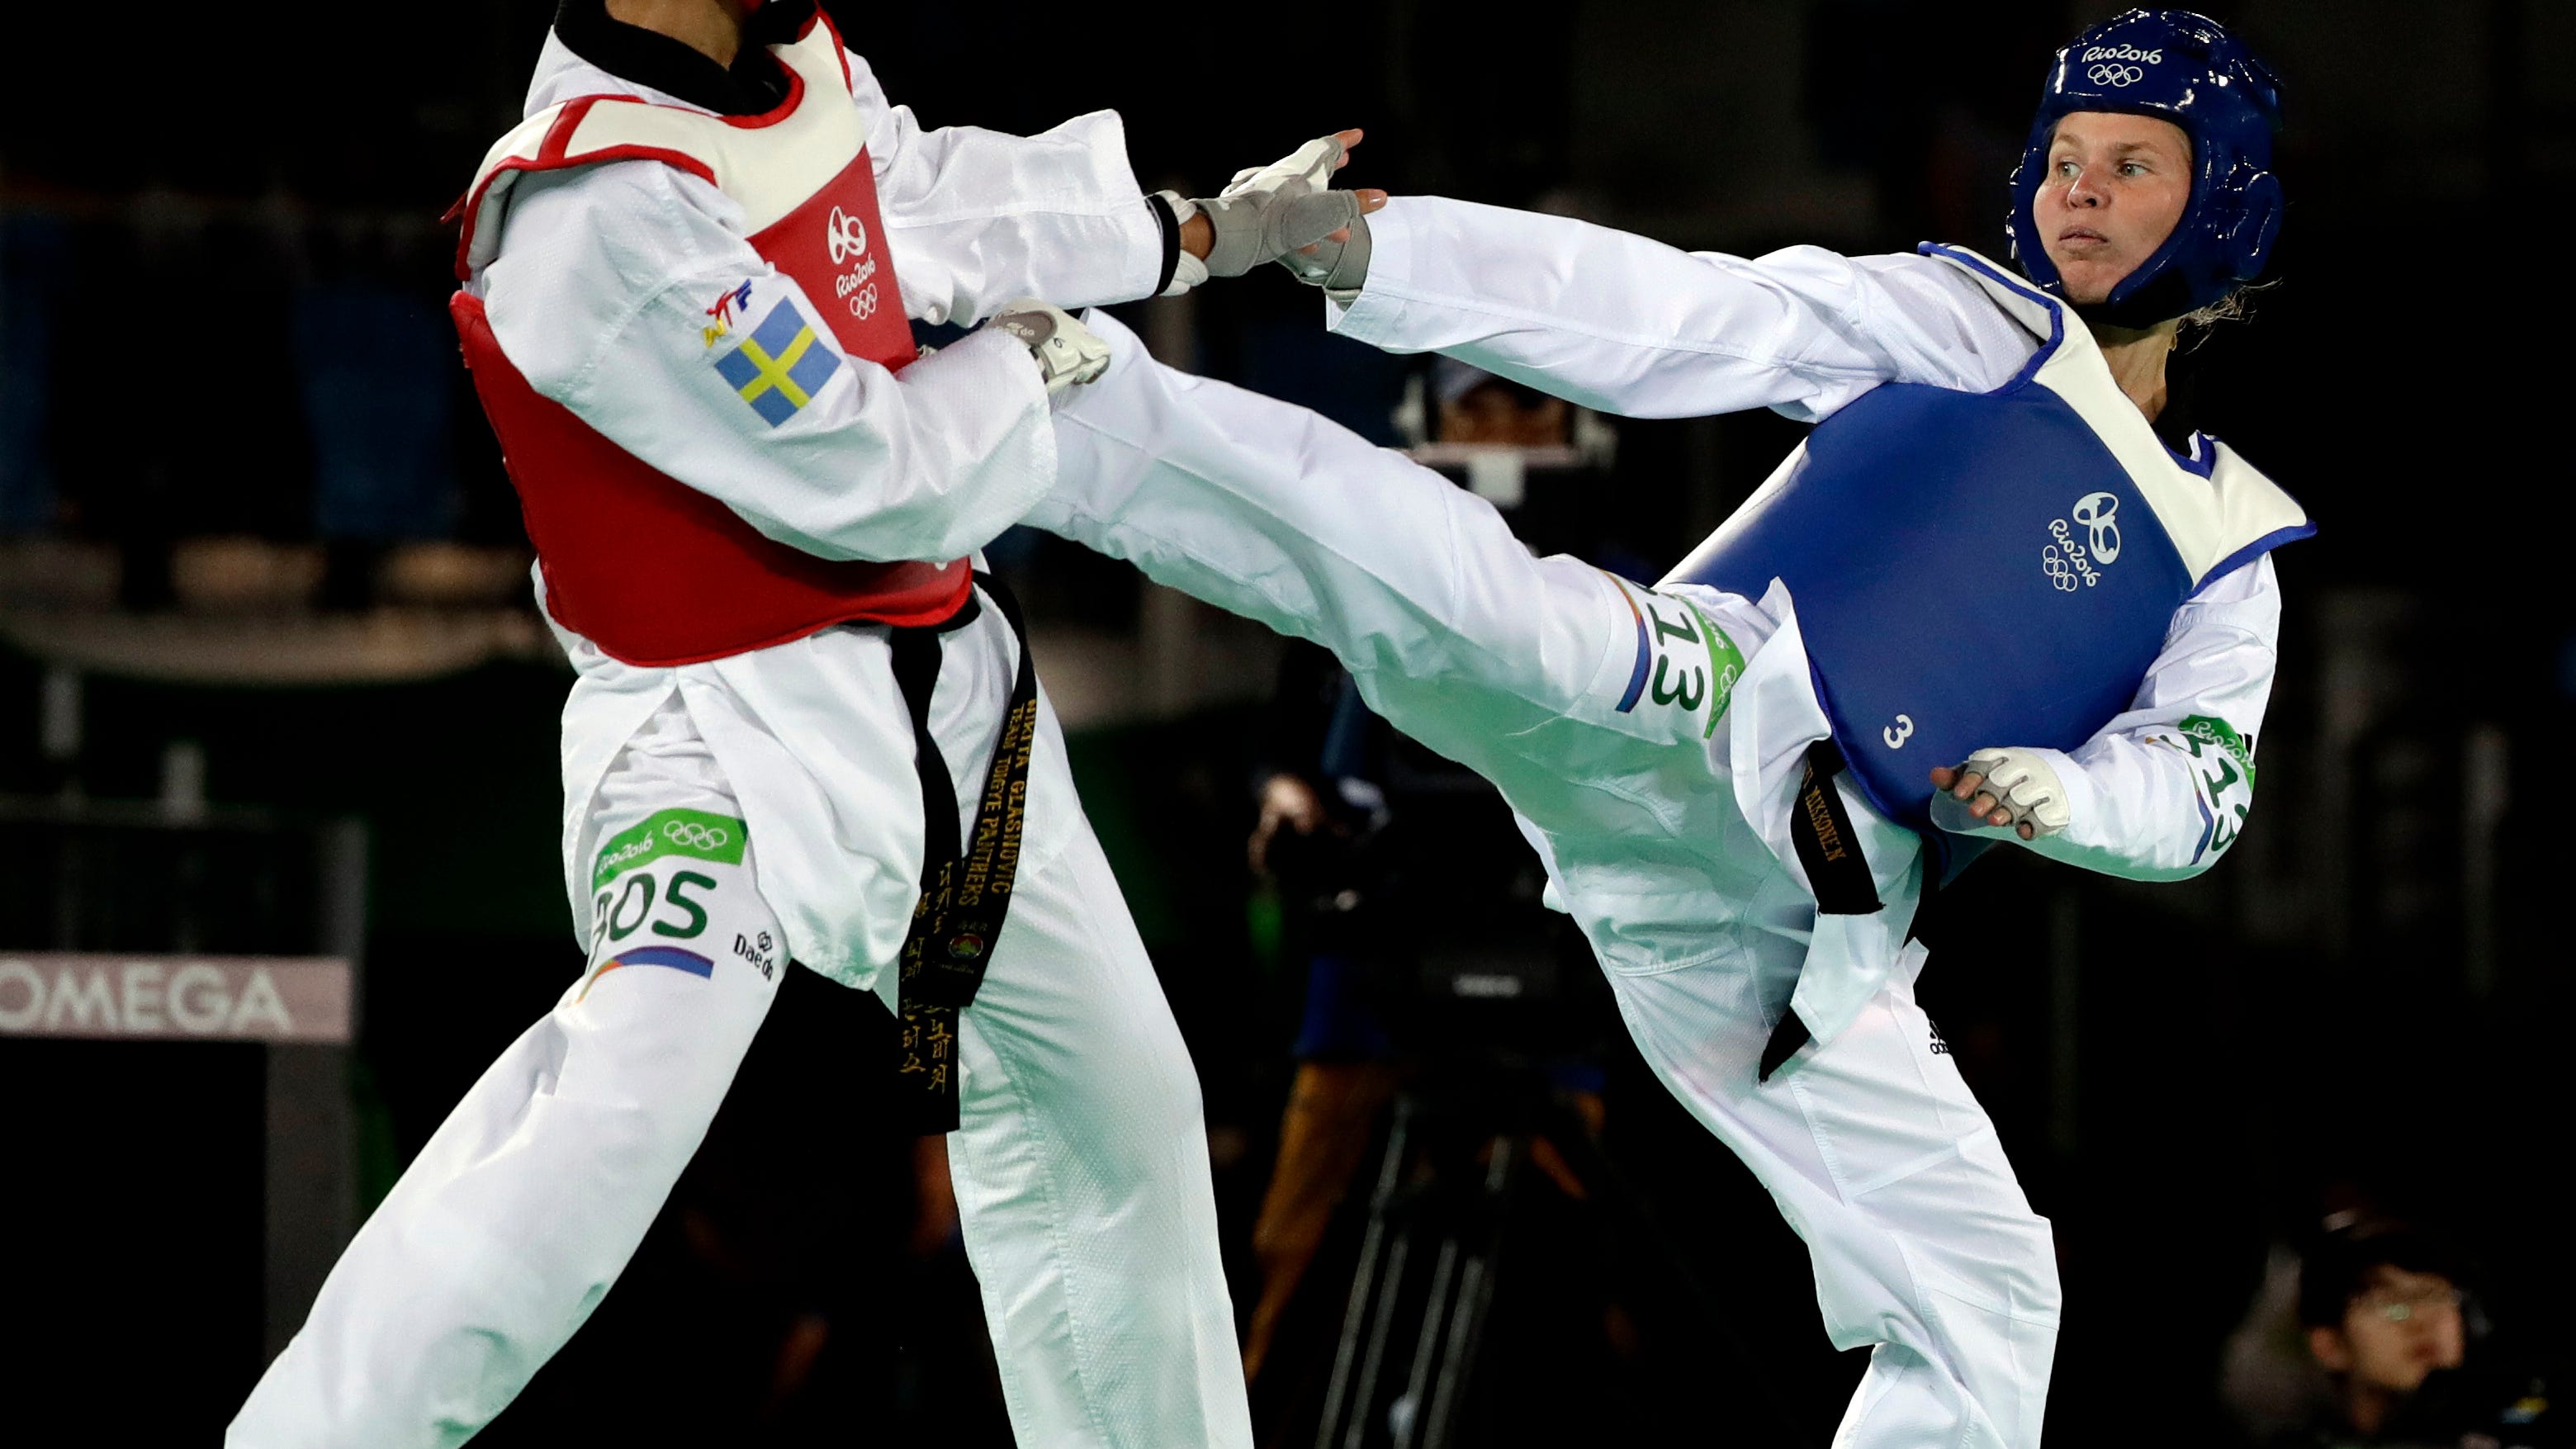 How is taekwondo scored? A guide to the Olympic sport